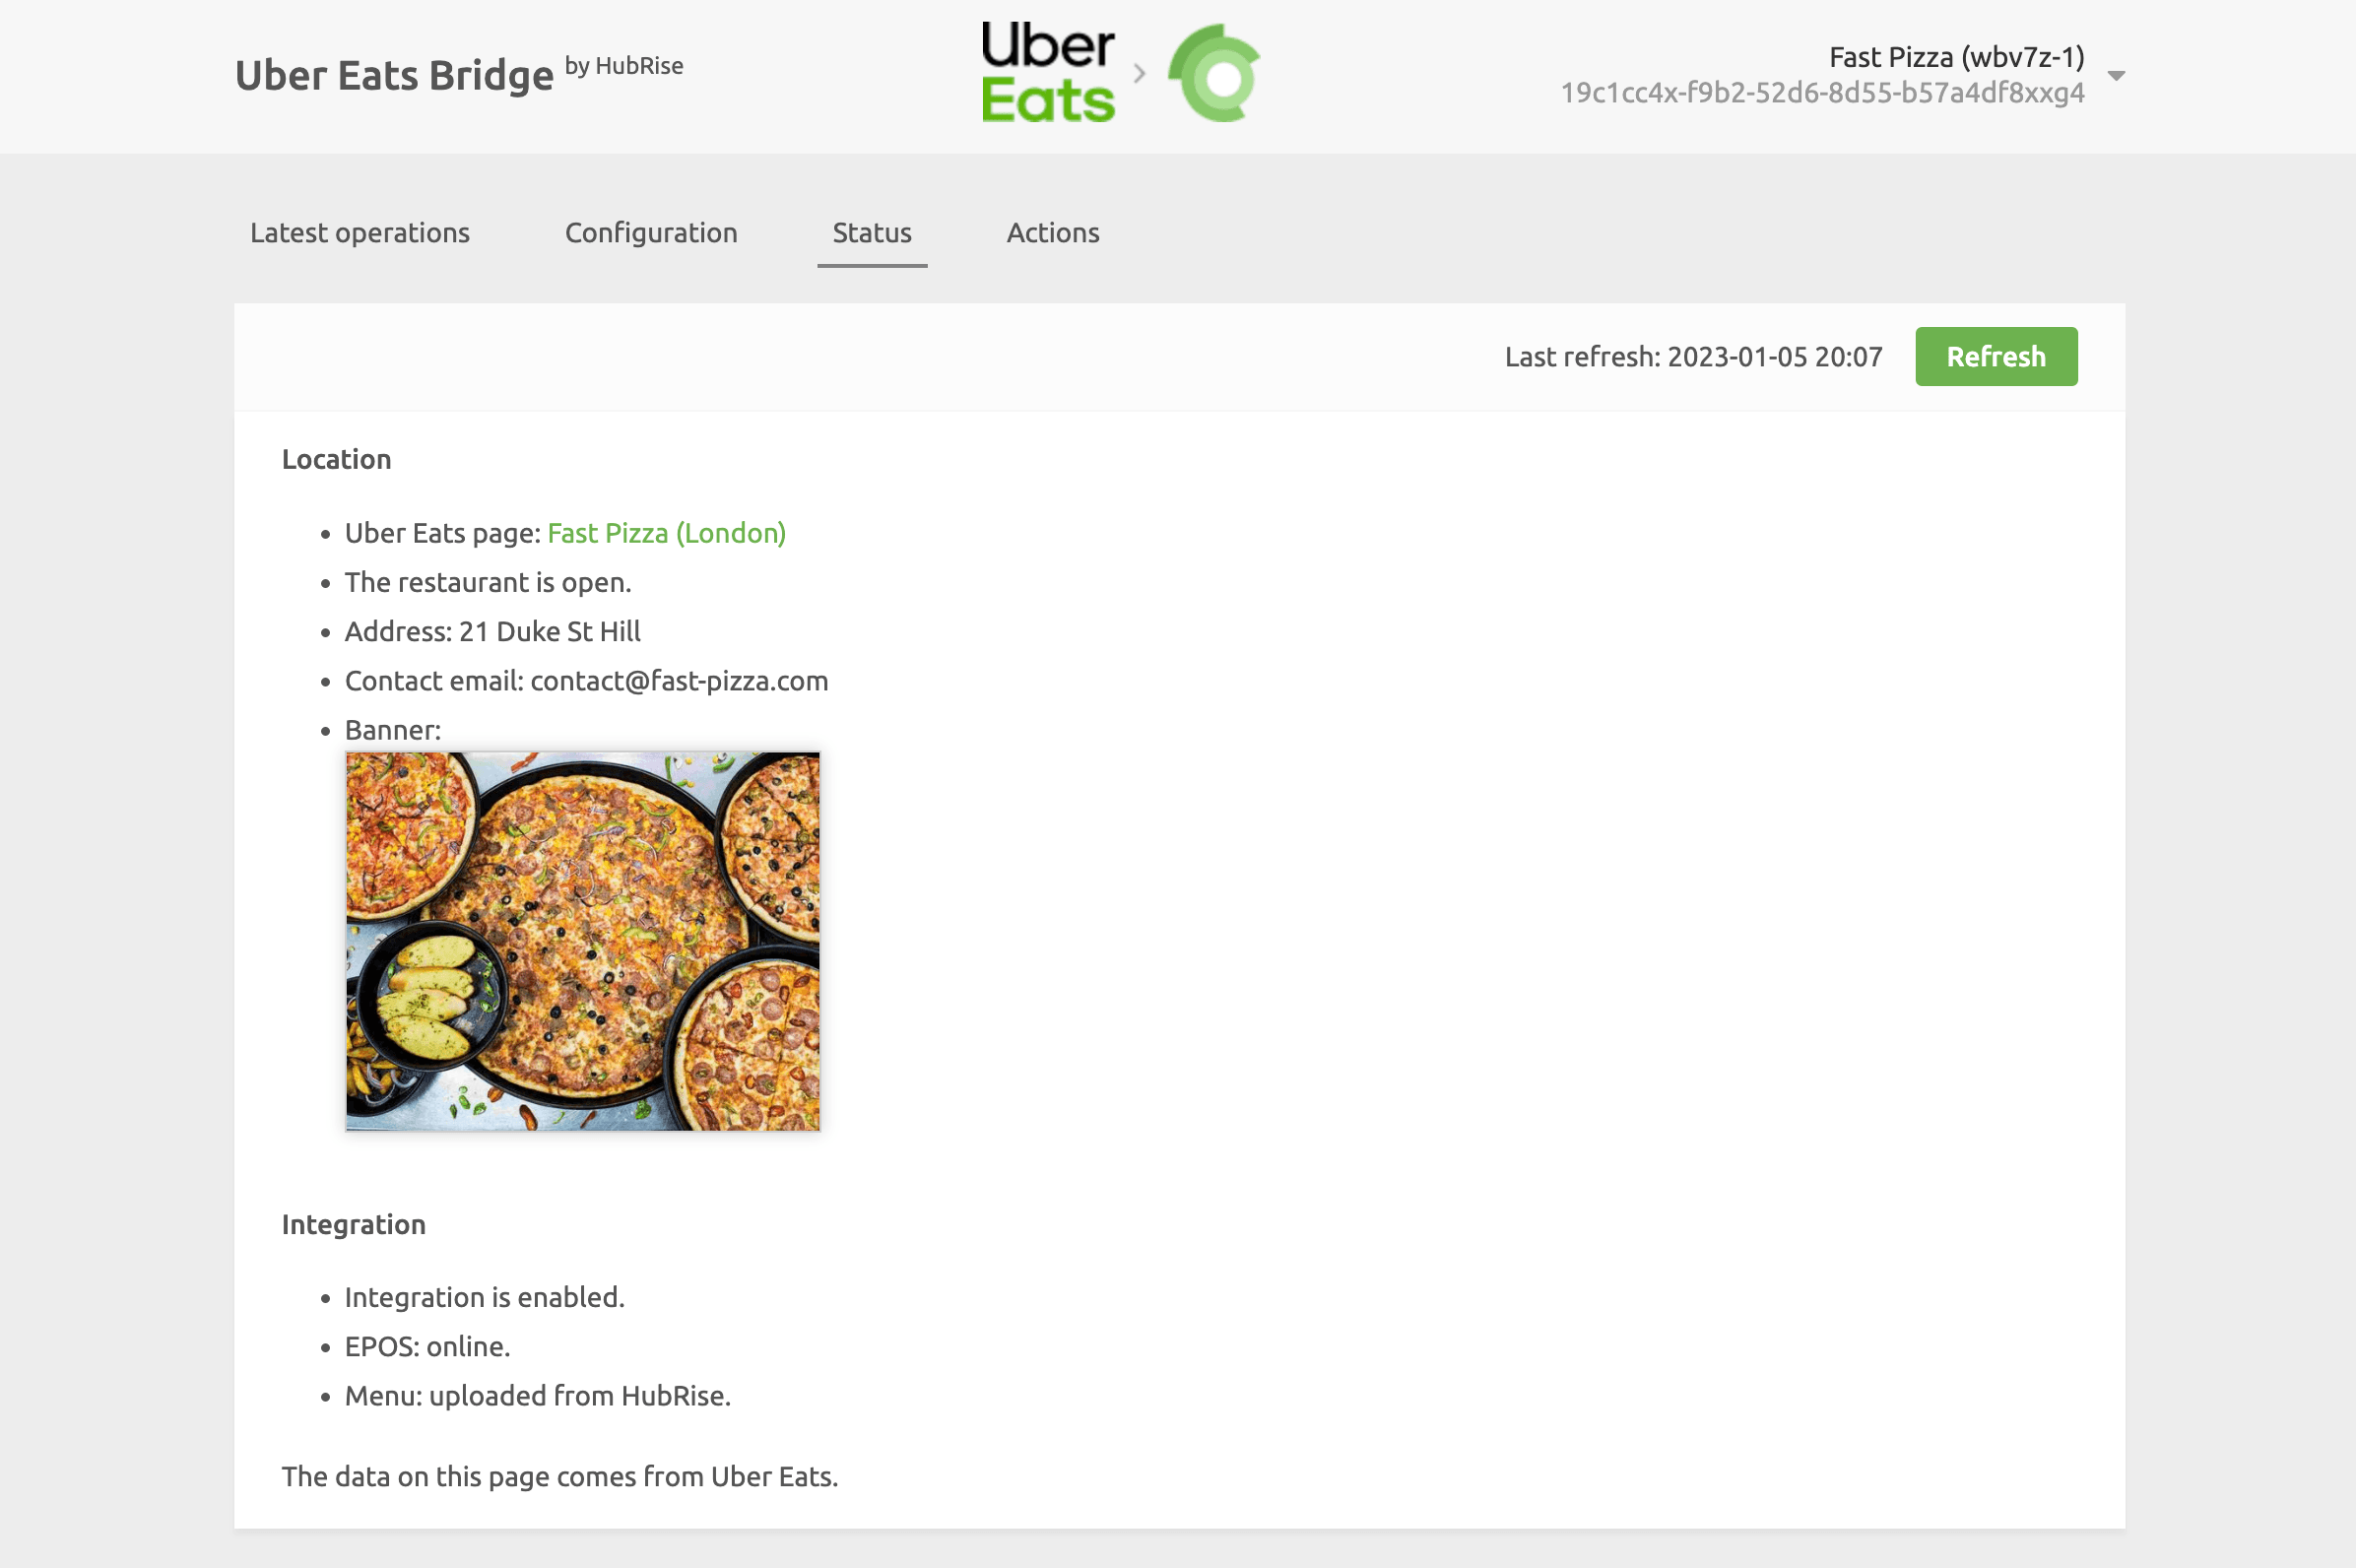 System request page on Uber Eats Bridge